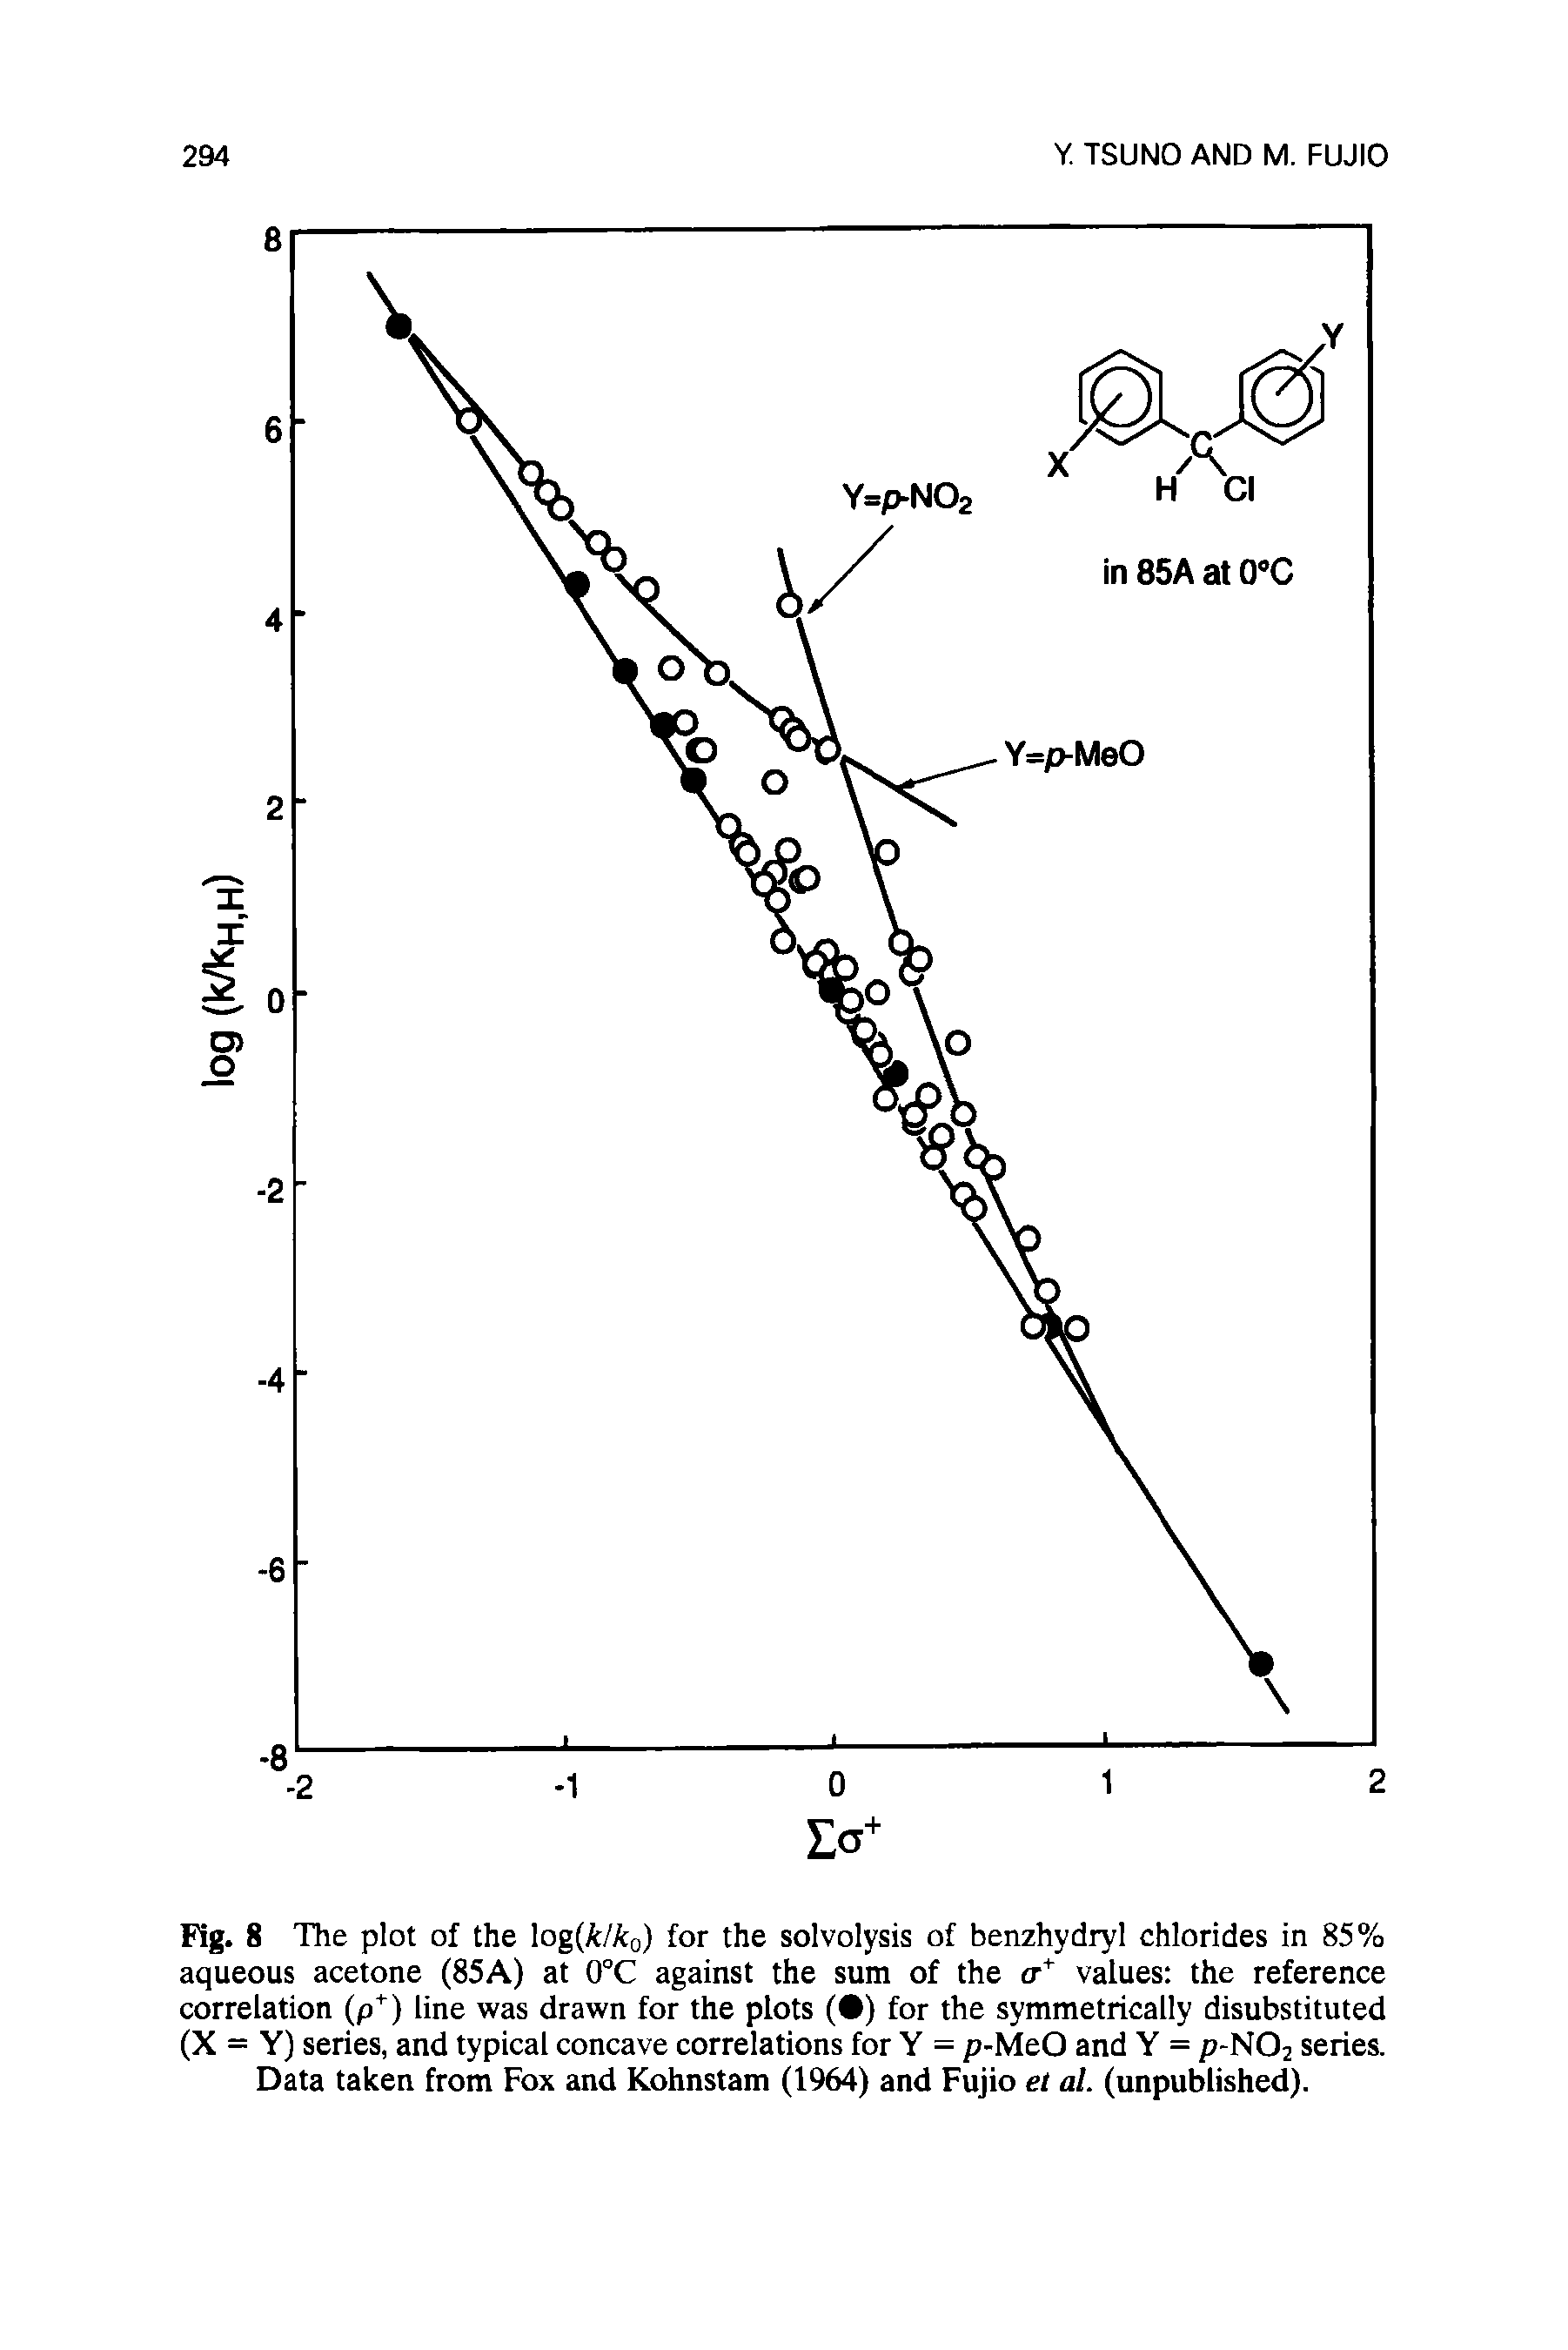 Fig. 8 The plot of the log(/c//co) for the solvolysis of benzhydryl chlorides in 85% aqueous acetone (85A) at 0°C against the sum of the a values the reference correlation (p ) line was drawn for the plots ( ) for the symmetrically disubstituted (X = Y) series, and typical concave correlations for Y = p-MeO and Y = /7-NO2 series. Data taken from Fox and Kohnstam (1964) and Fujio et al. (unpublished).